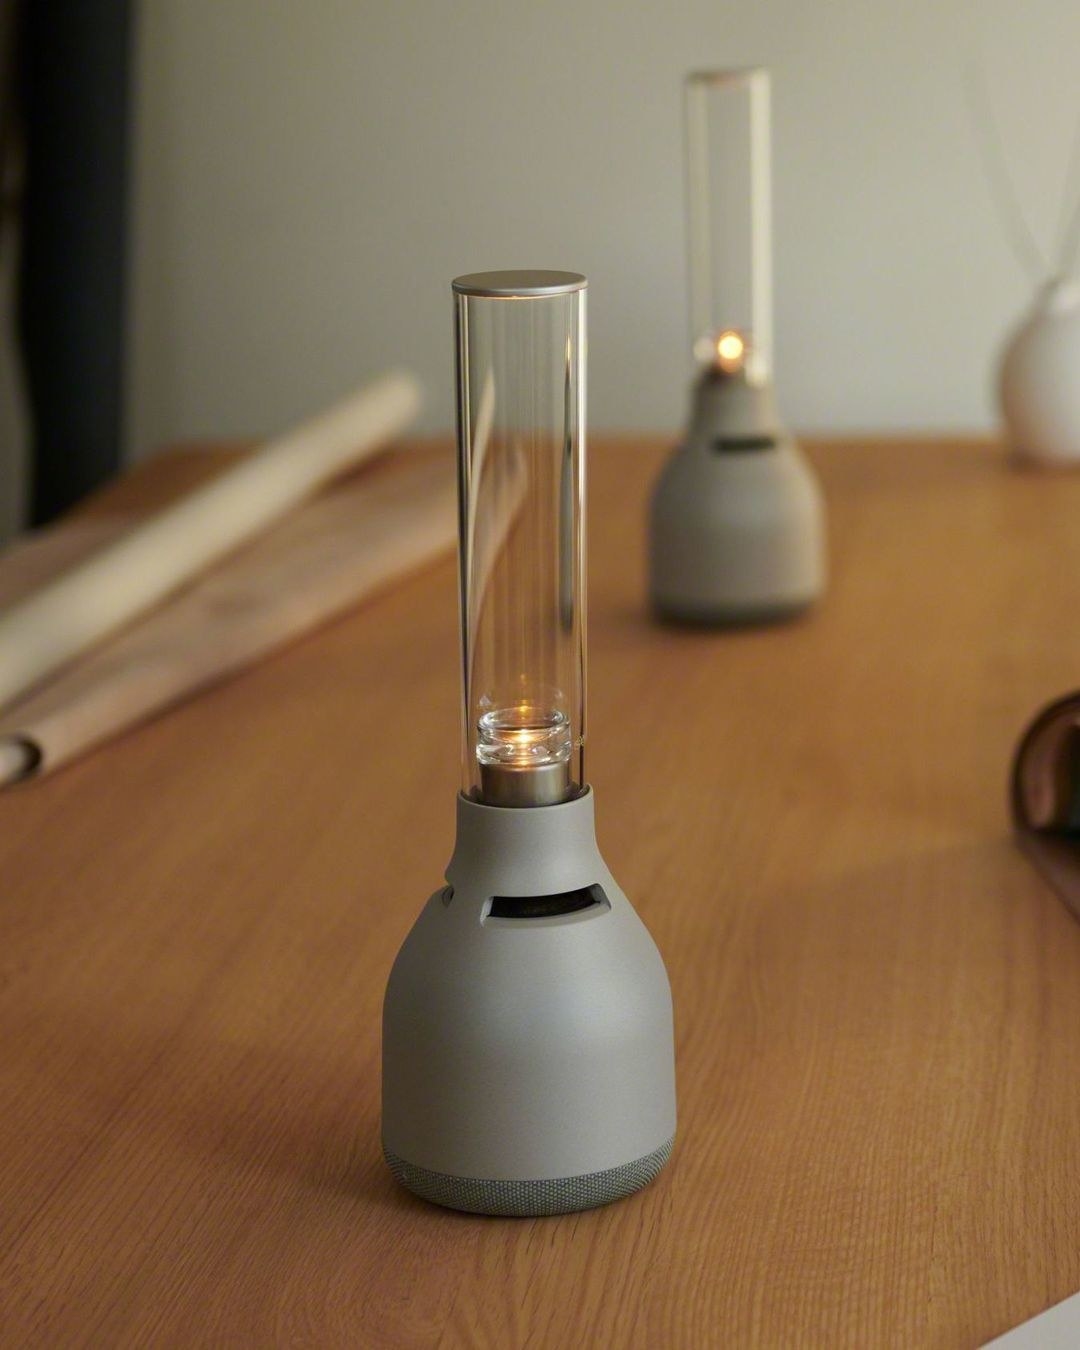 the glass speaker that has a ceramic base